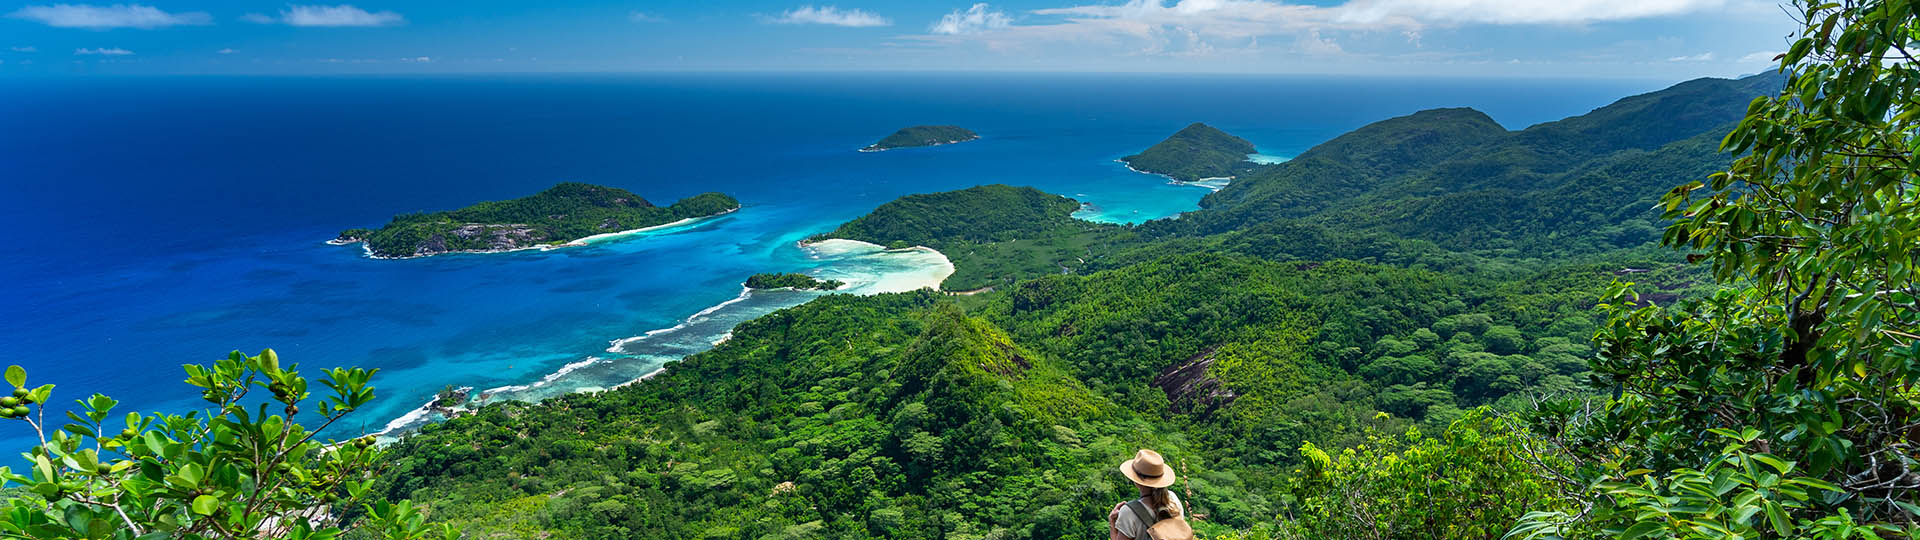 solo traveller high up on tropical island mountain